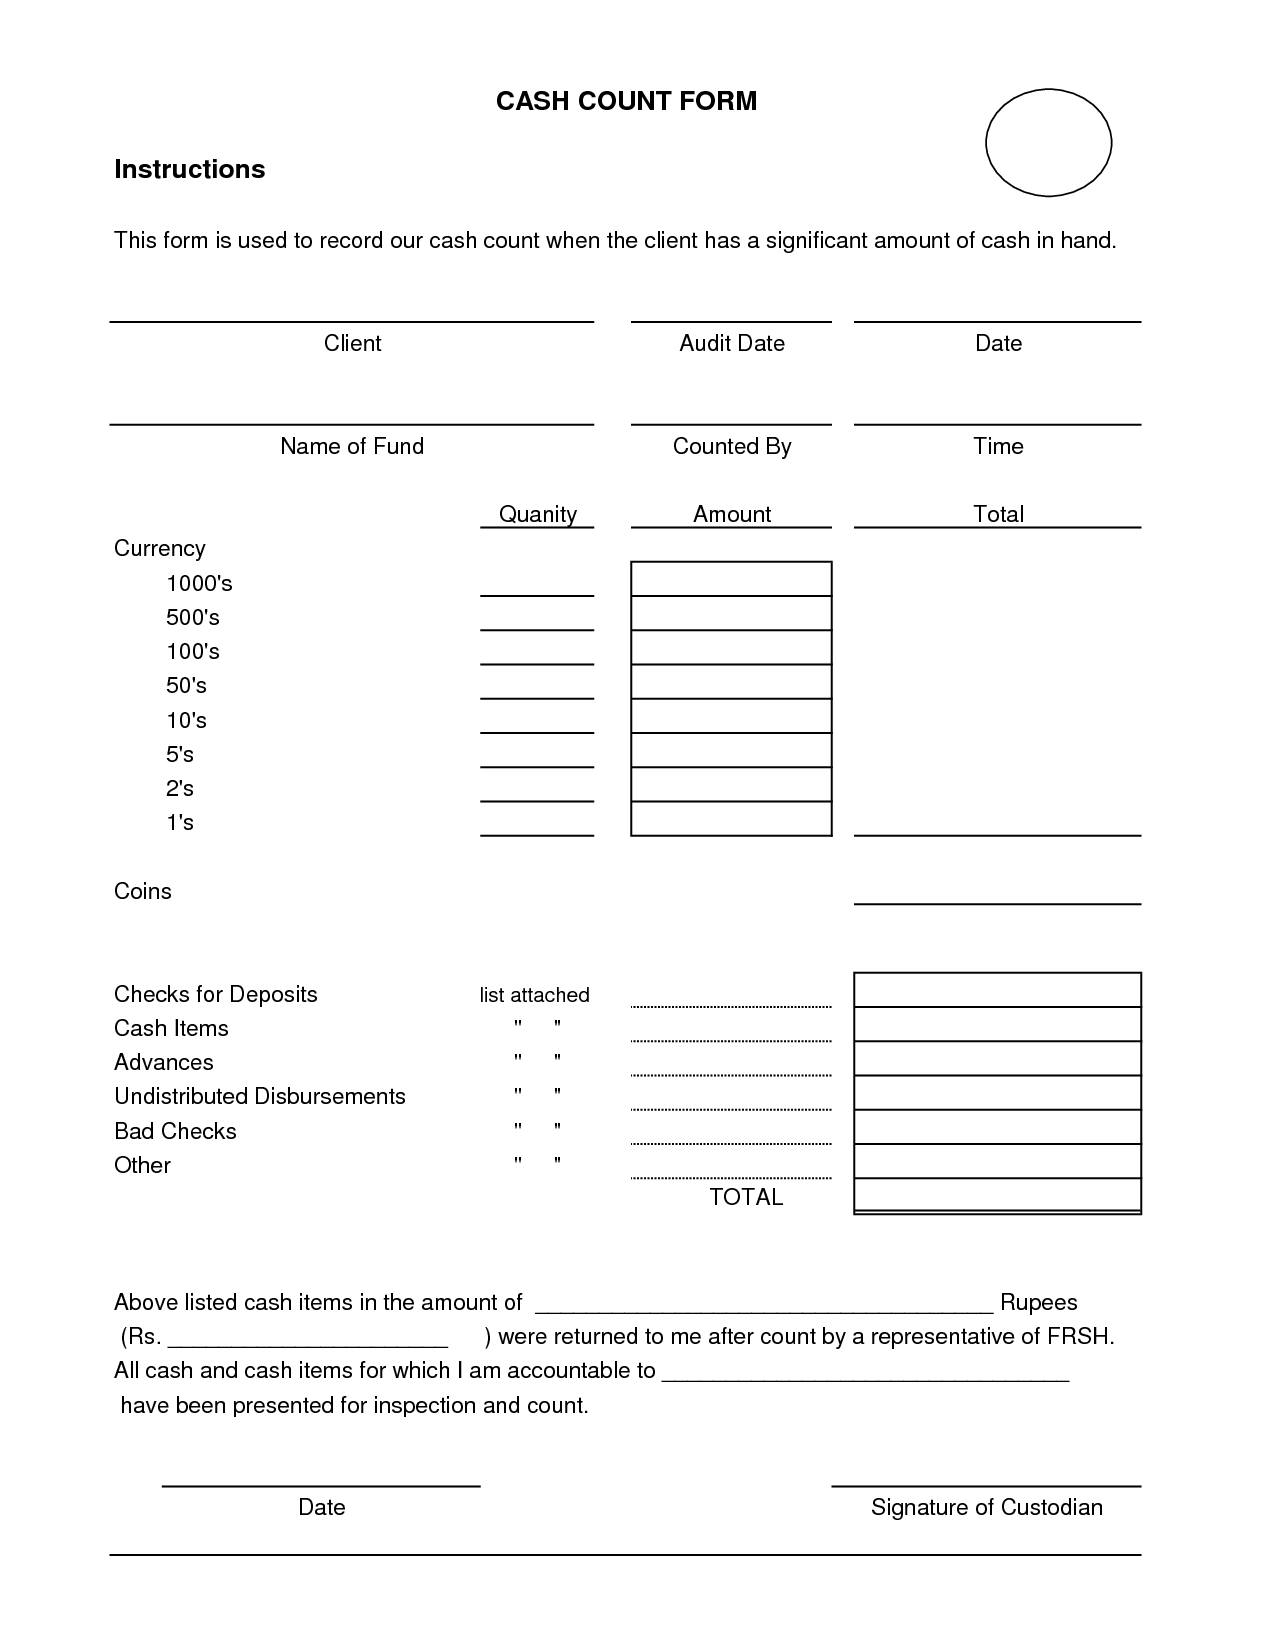 Cash Count Sheet Template   Fill Online, Printable, Fillable 